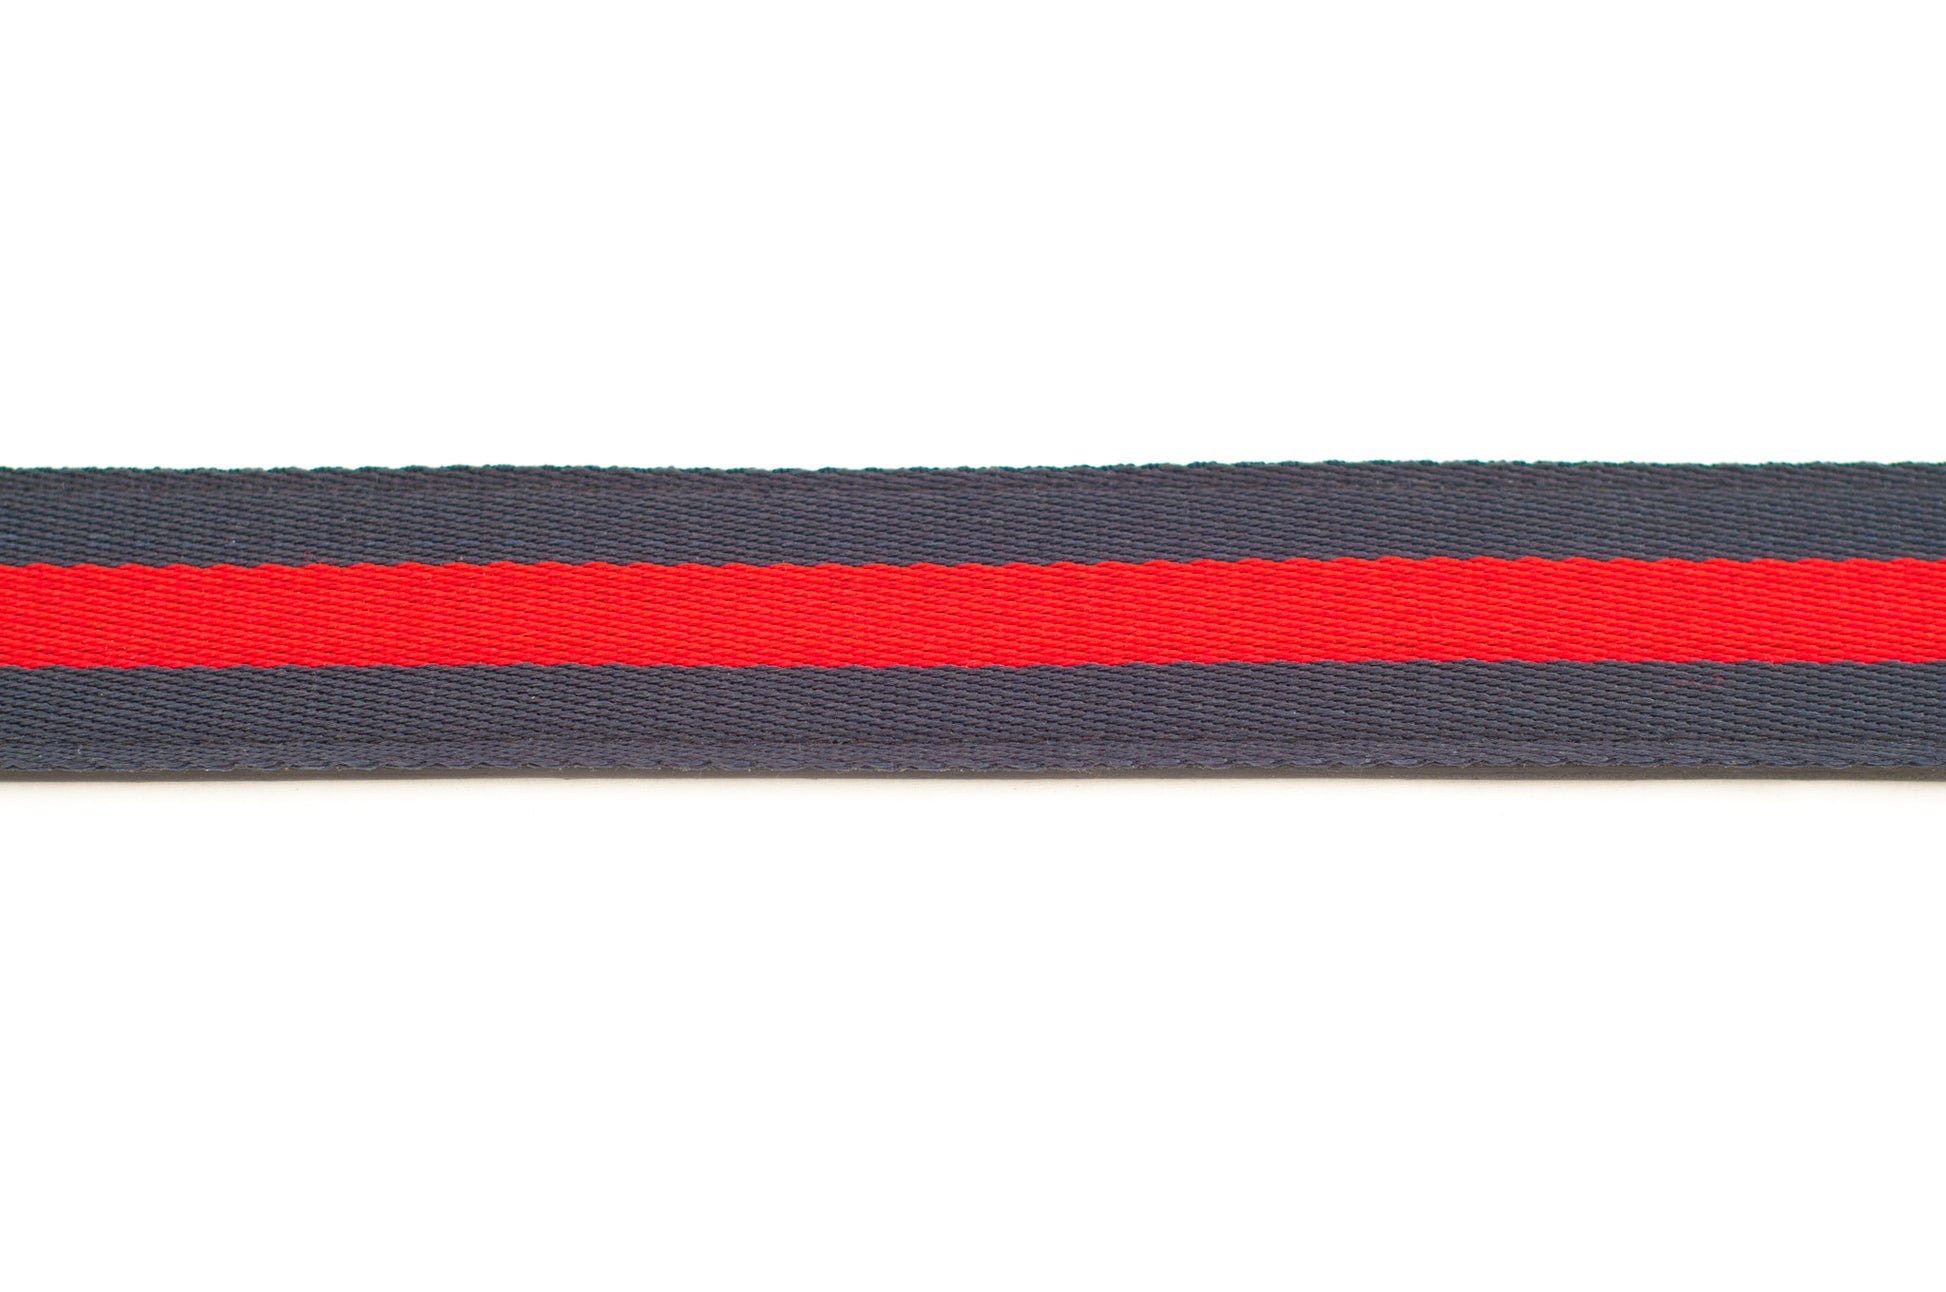 Men's cloth belt strap in navy-red stripe with a 1.25-inch width, casual look, flat lay